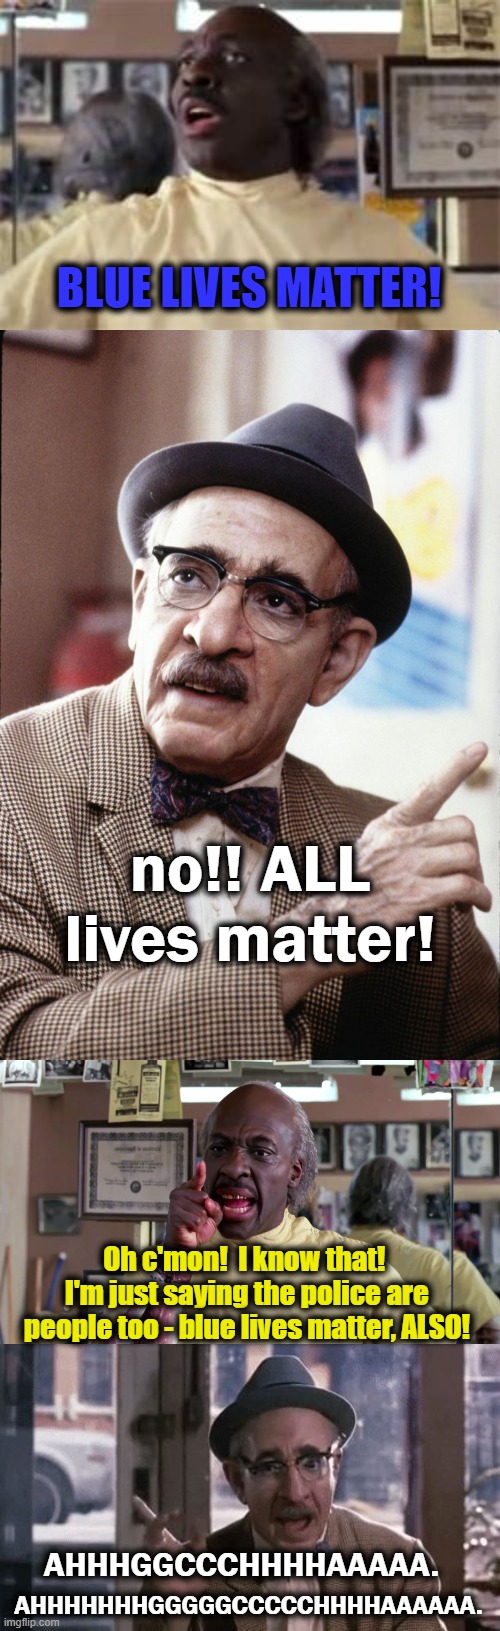 Getting the point across | BLUE LIVES MATTER! no!! ALL lives matter! Oh c'mon!  I know that!  I'm just saying the police are people too - blue lives matter, ALSO! AHHHGGCCCHHHHAAAAA. AHHHHHHHGGGGGCCCCCHHHHAAAAAA. | image tagged in coming to america,blue lives matter,all lives matter,black lives matter | made w/ Imgflip meme maker